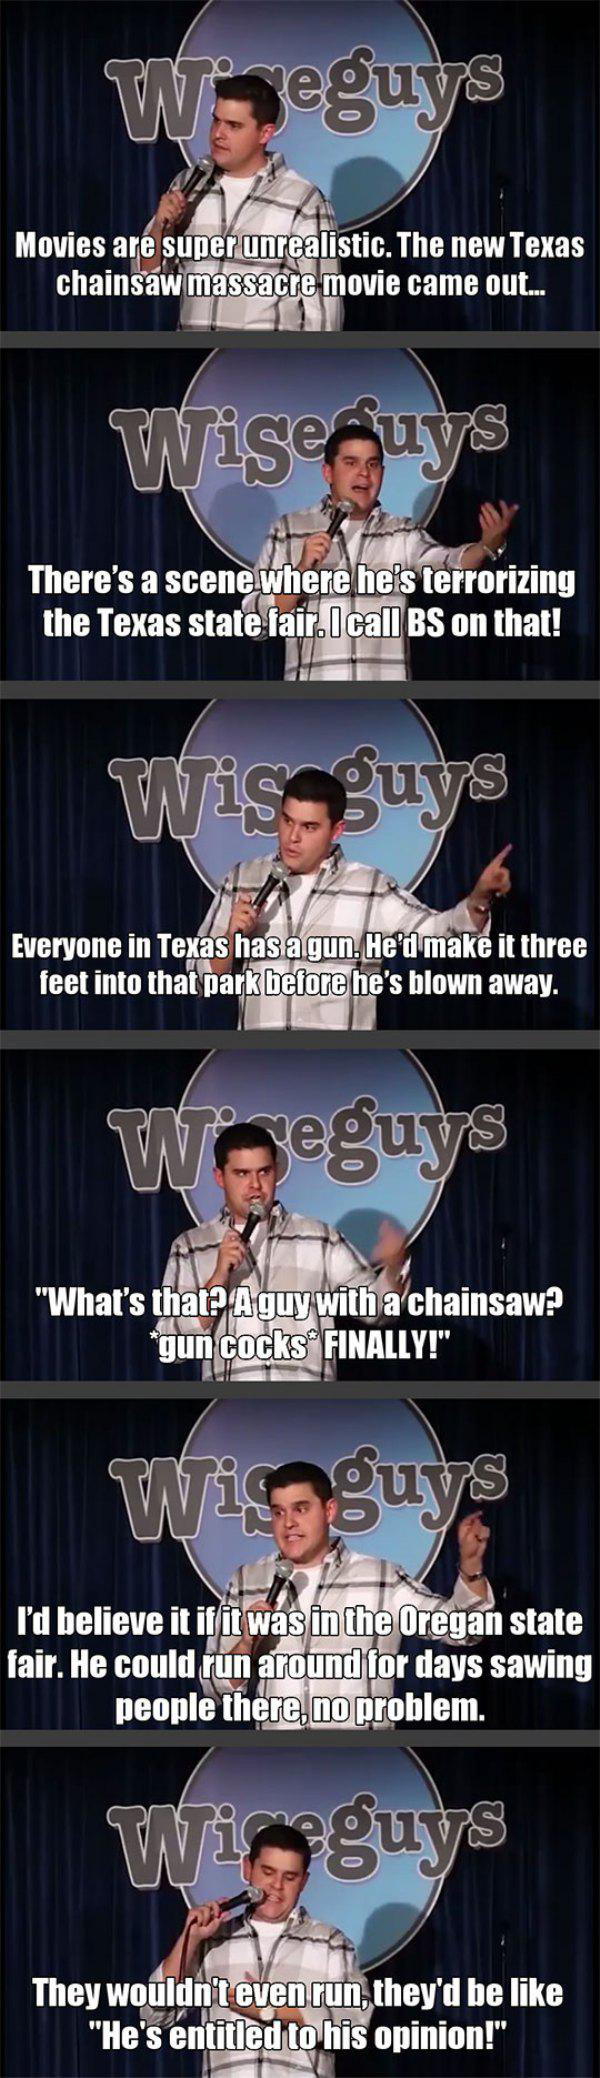 texas chainsaw massacre comedian - geguys Movies are super unrealistic. The new Texas chainsaw massacre movie came out... Wise guys There's a scene where he's terrorizing the Texas state fair. I call Bs on that! Wis guys Everyone in Texas has a gun. He'd 